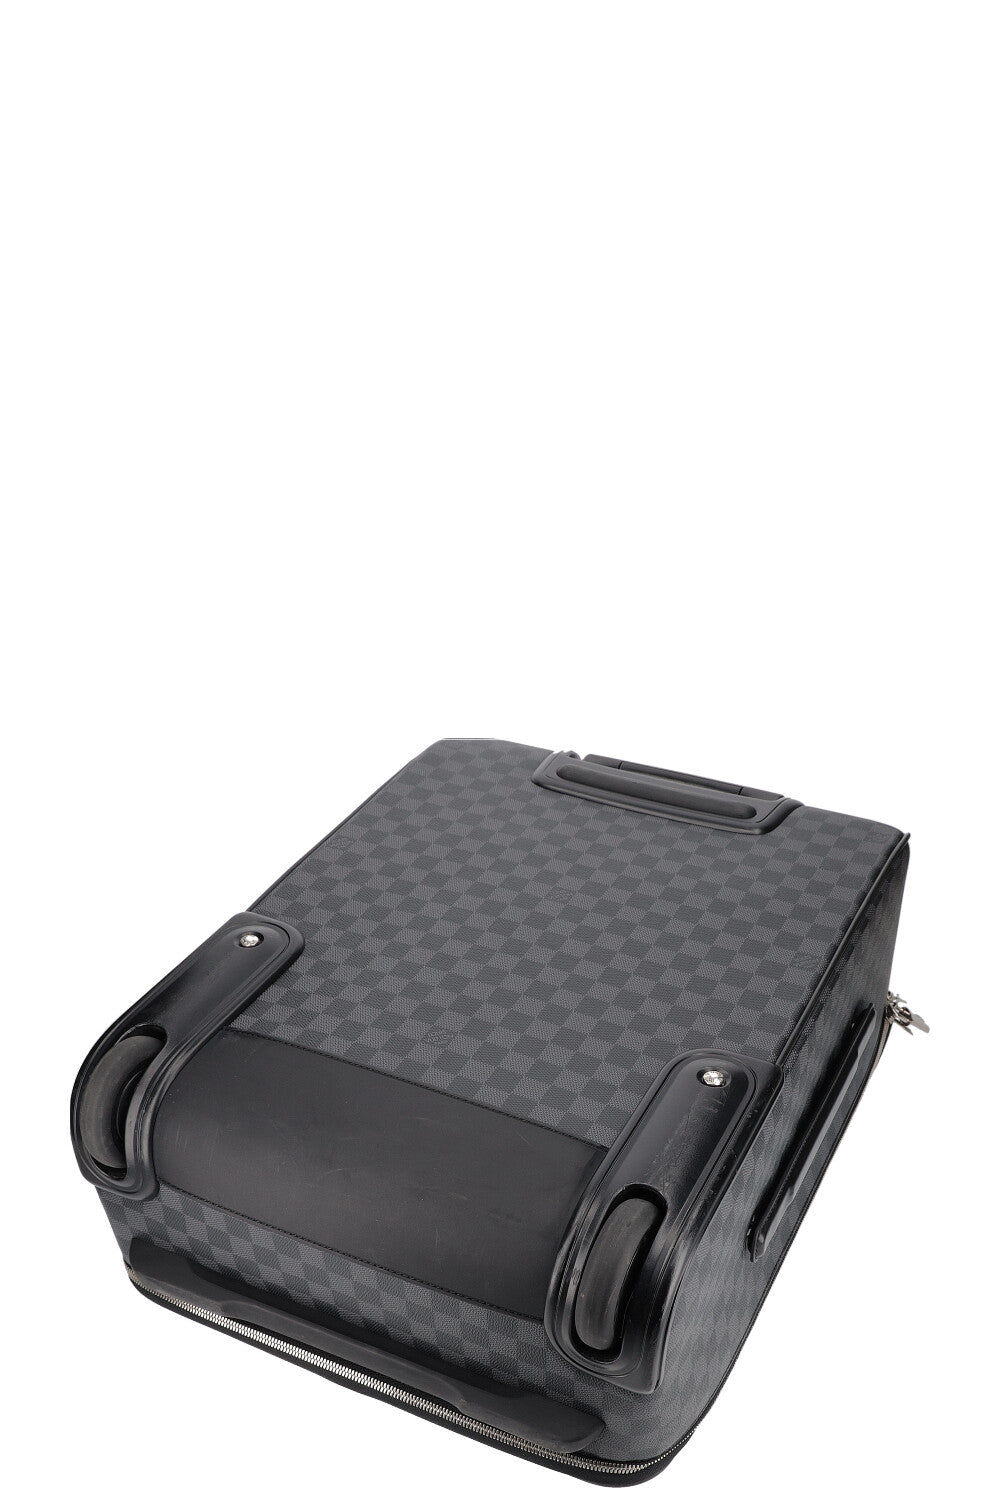 Damier Graphite Pégase 55 Suitcase (Authentic Pre-Owned) – The Lady Bag